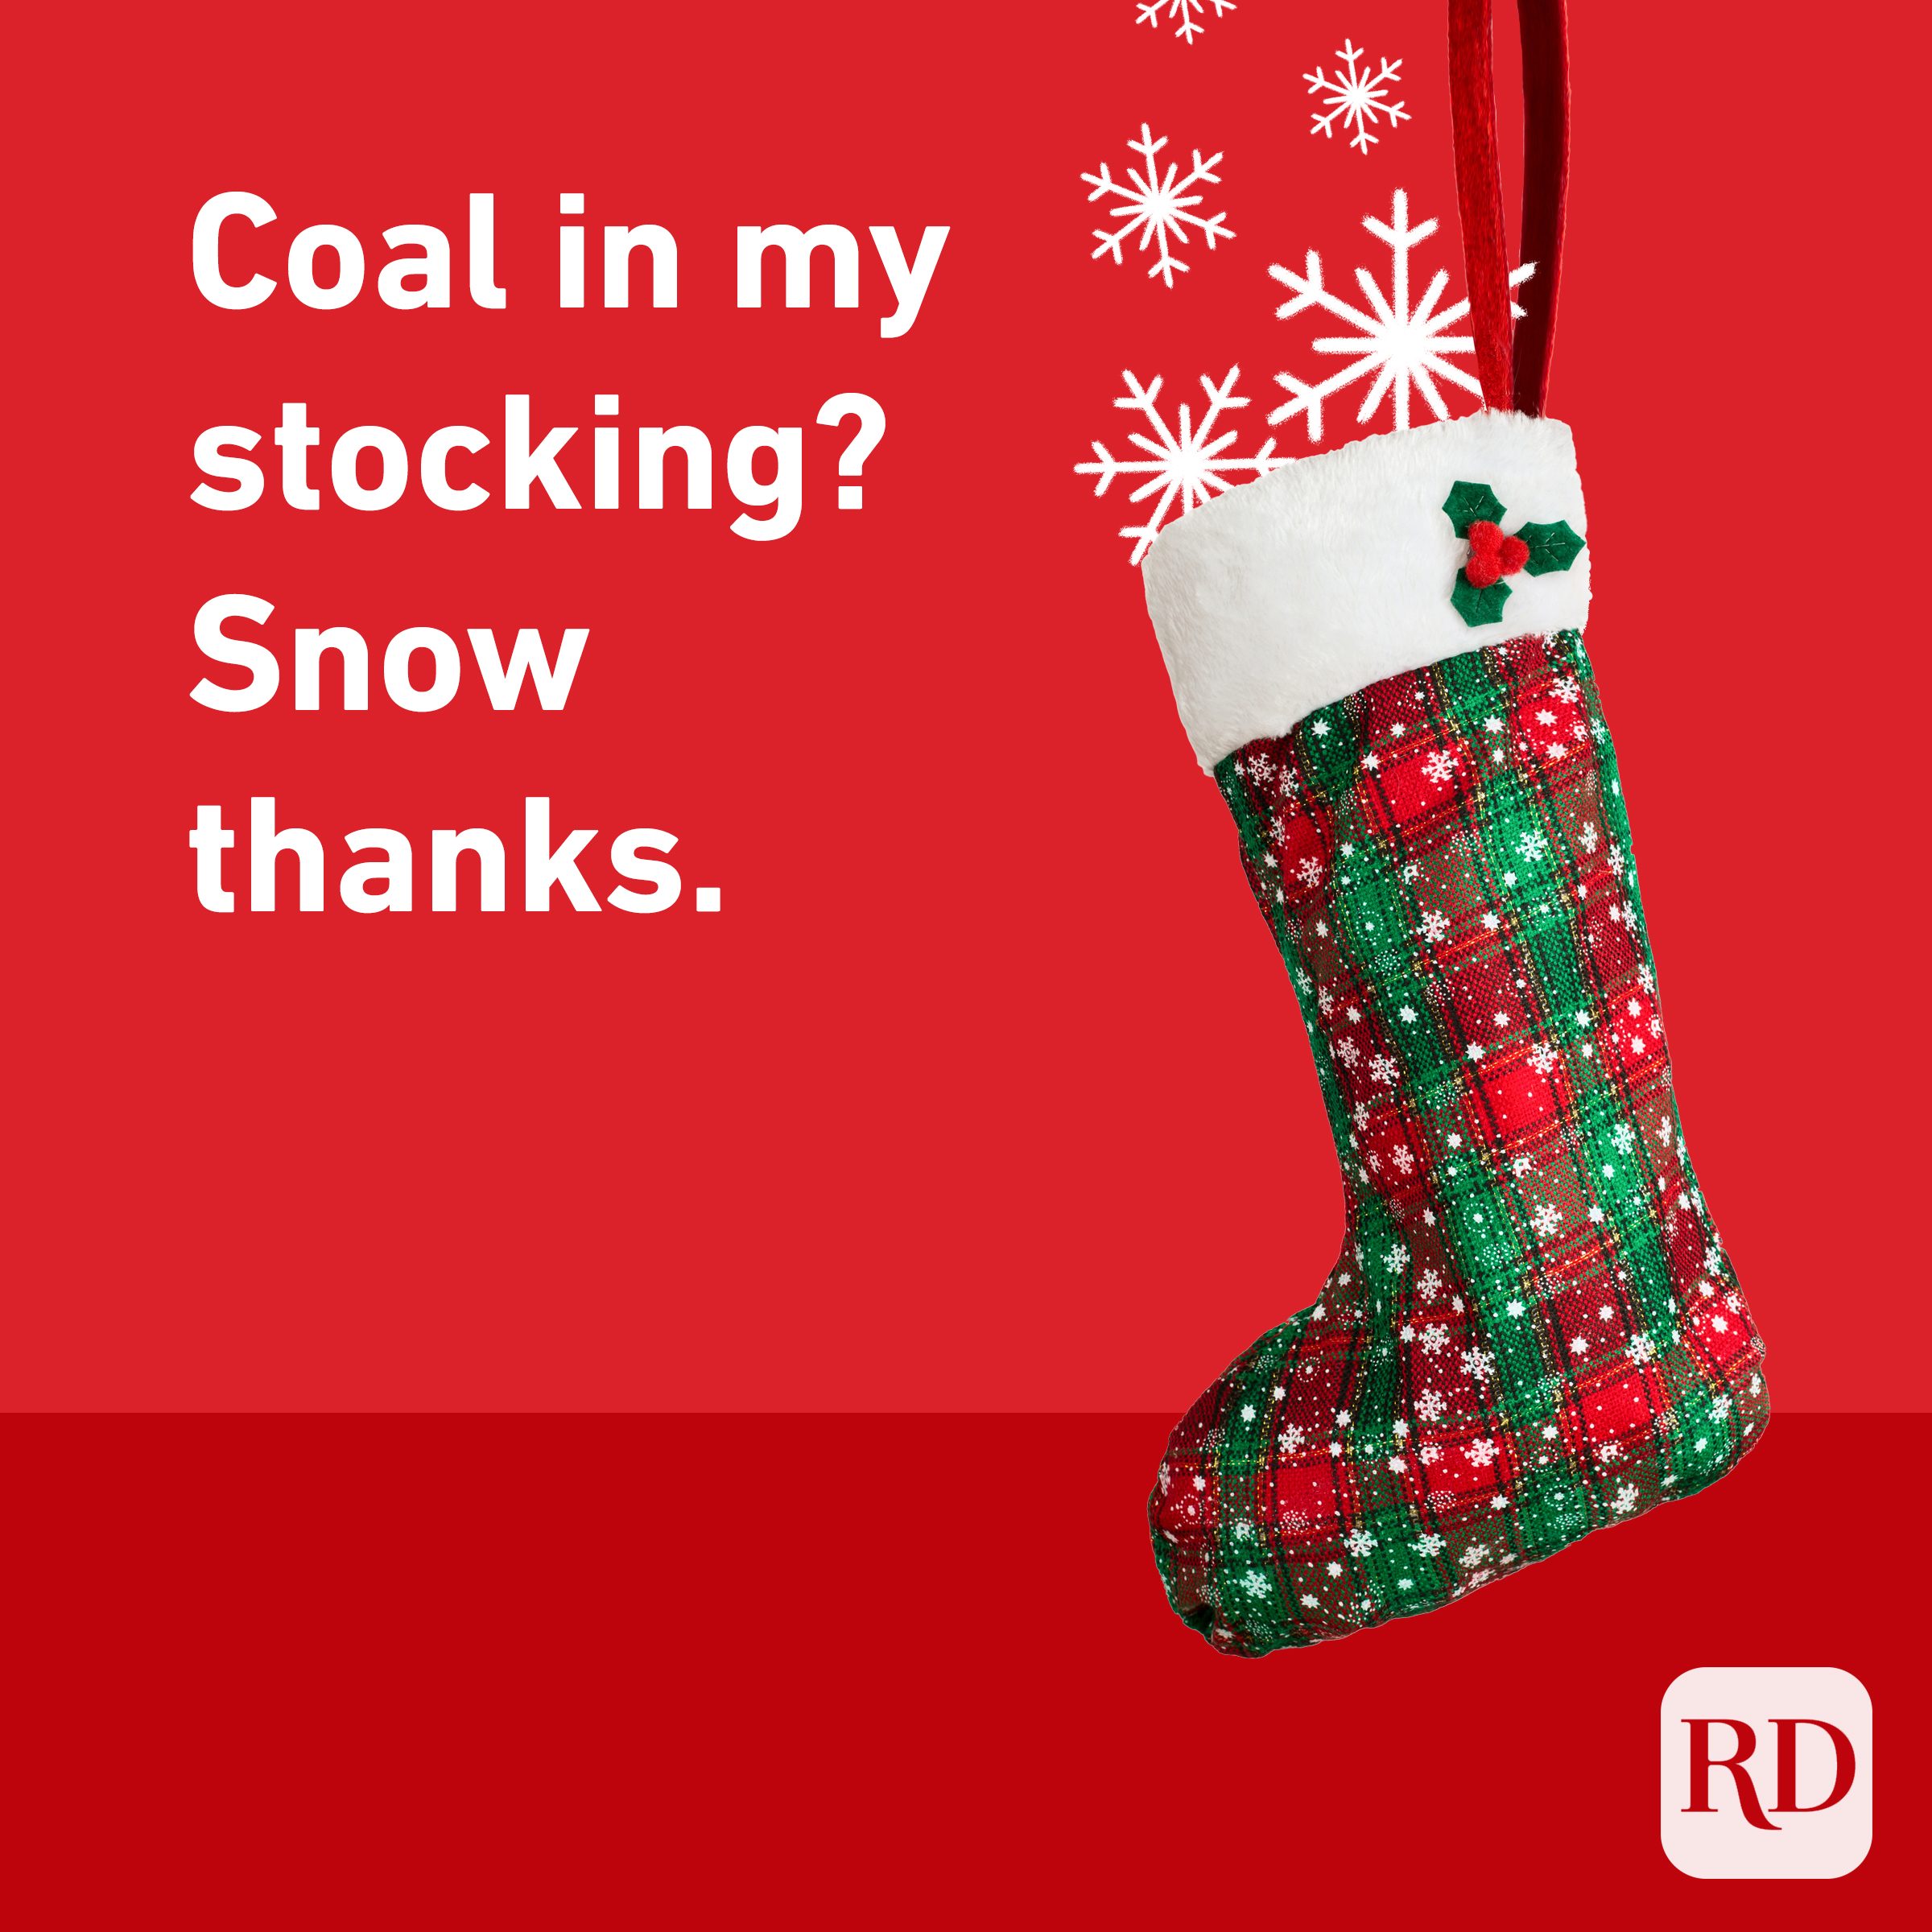 Coal in my stocking? Snow thanks. There is a stocking with snowflakes filling it